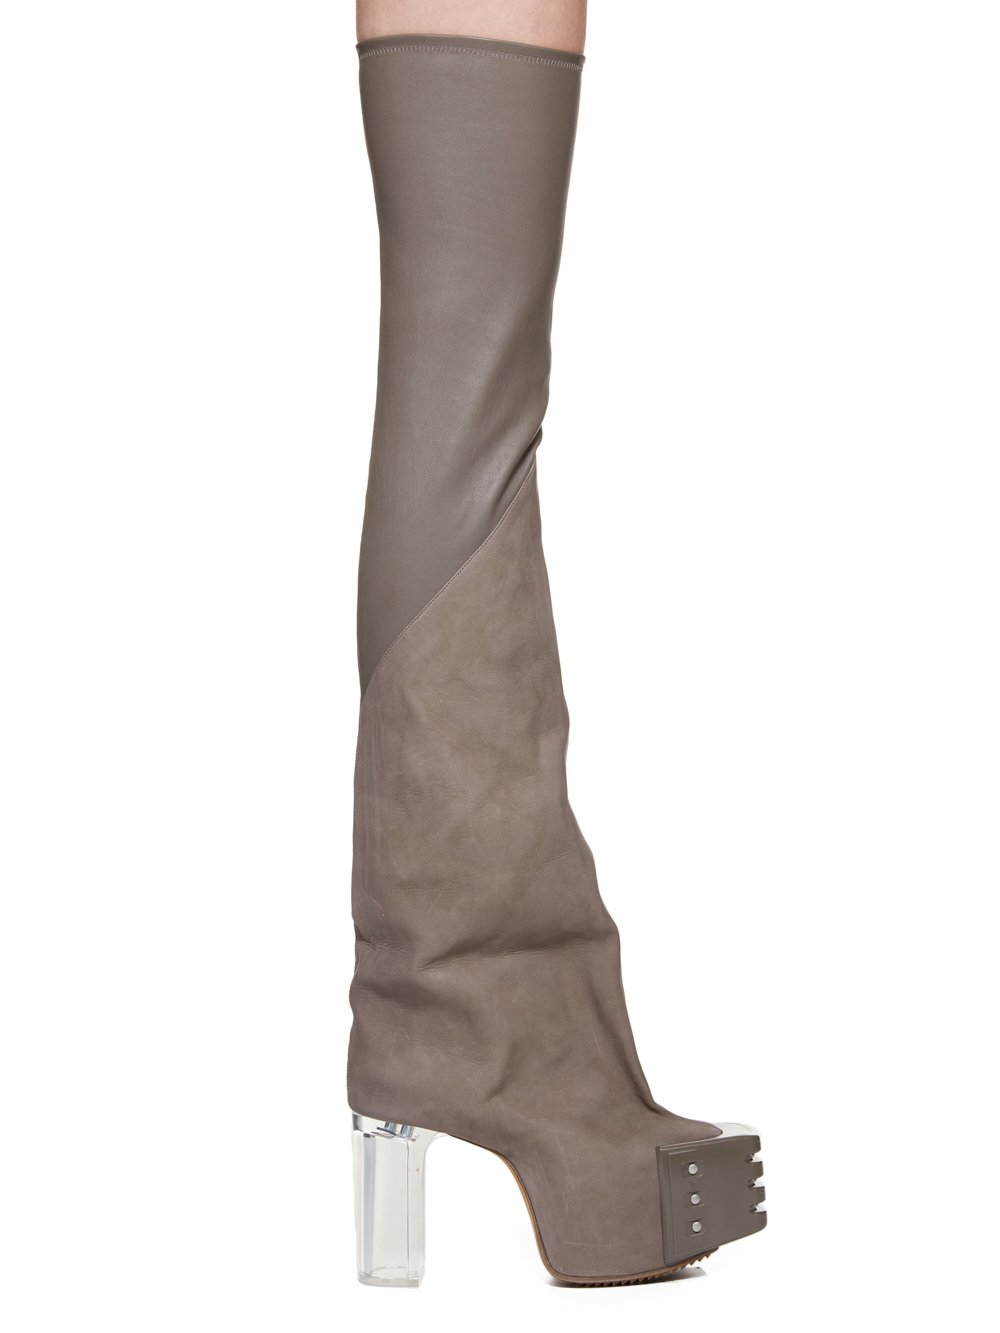 RICK OWENS FW23 LUXOR RUNWAY FLARED PLATFORMS 45 IN DUST STRETCH LAMB LEATHER AND GREYWOLF NUBUCK